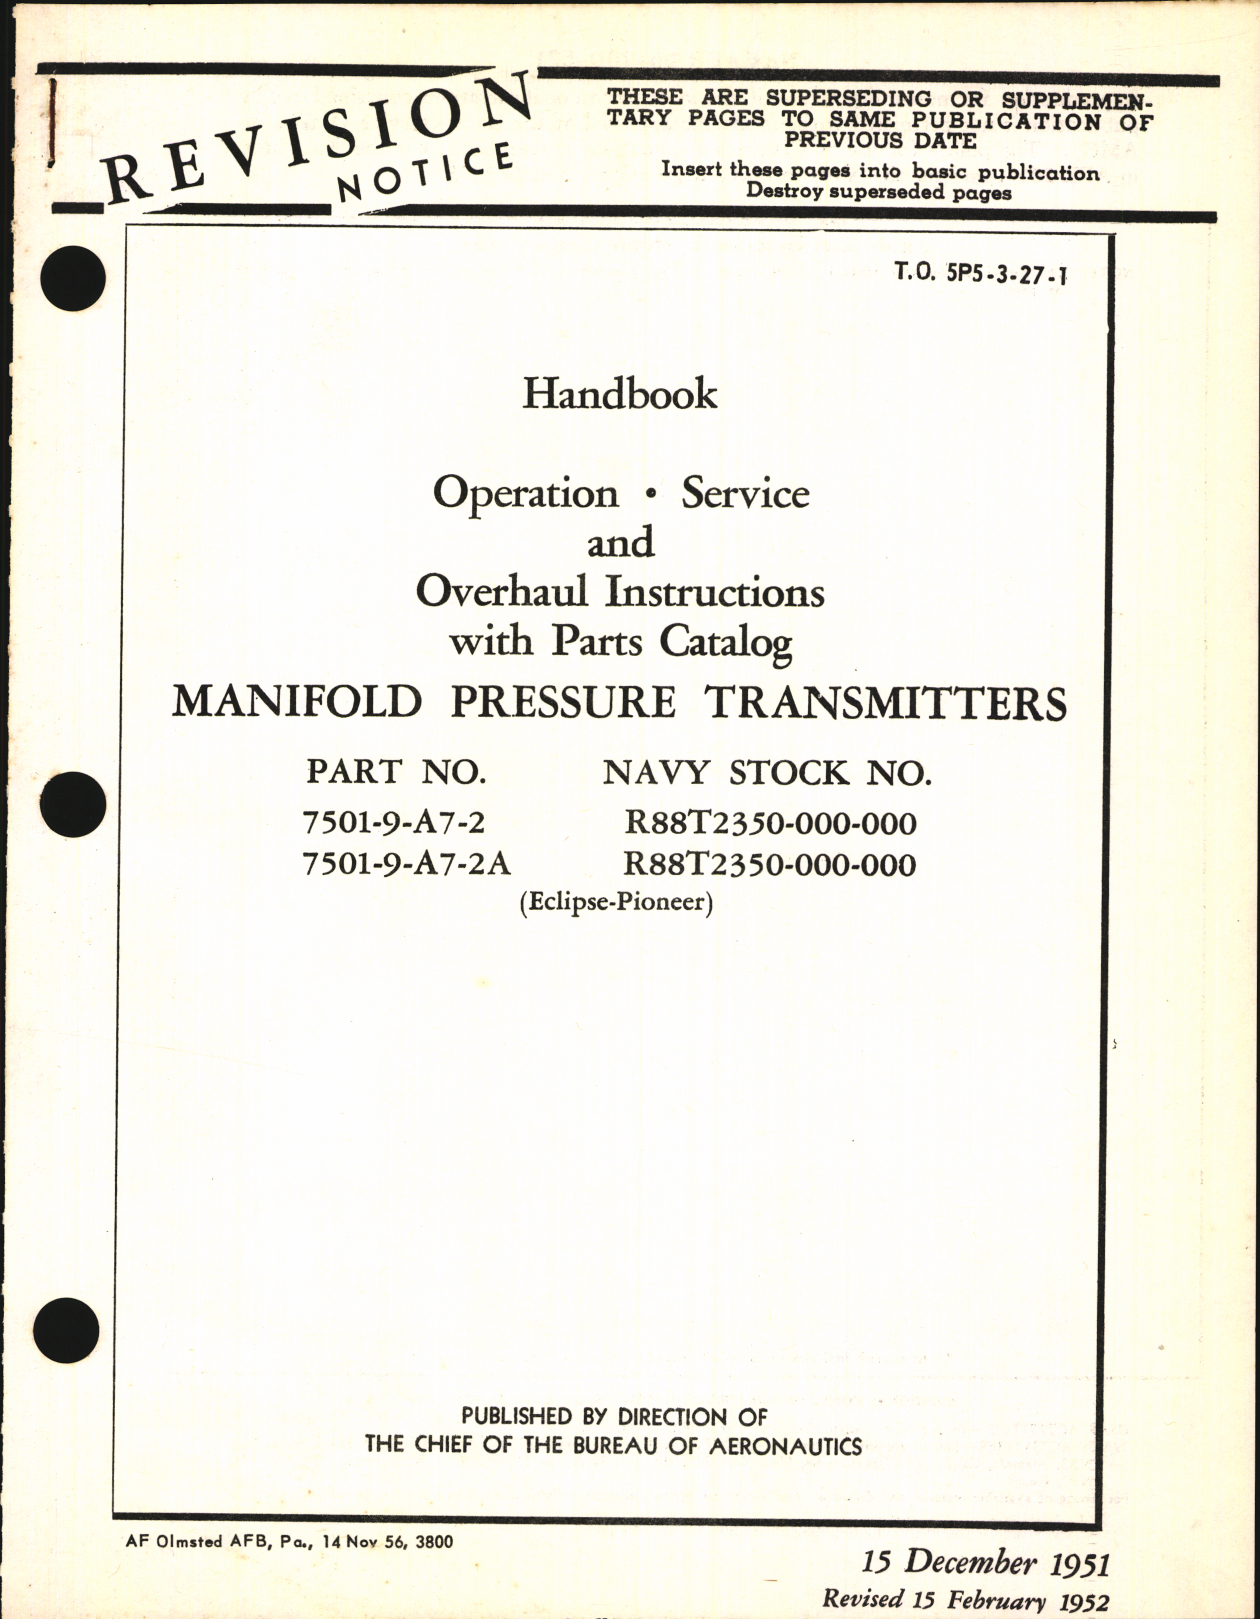 Sample page 1 from AirCorps Library document: Operation, Service, & Overhaul Inst w/ Parts Catalog for Manifold Pressure Transmitters